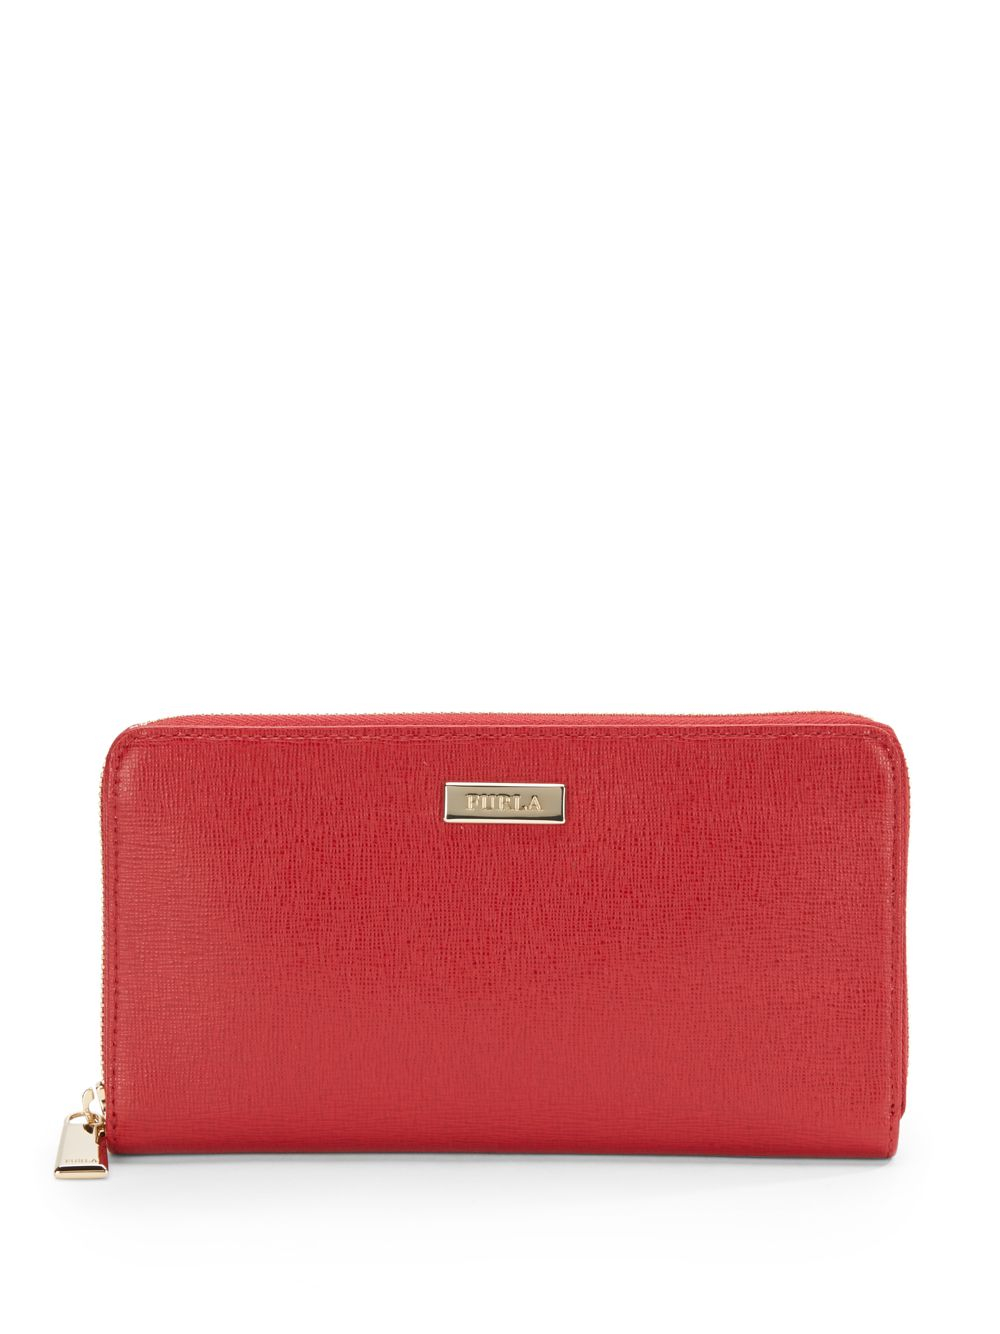 Furla Classic Xl Saffiano Leather Zip-around Wallet in Red | Lyst